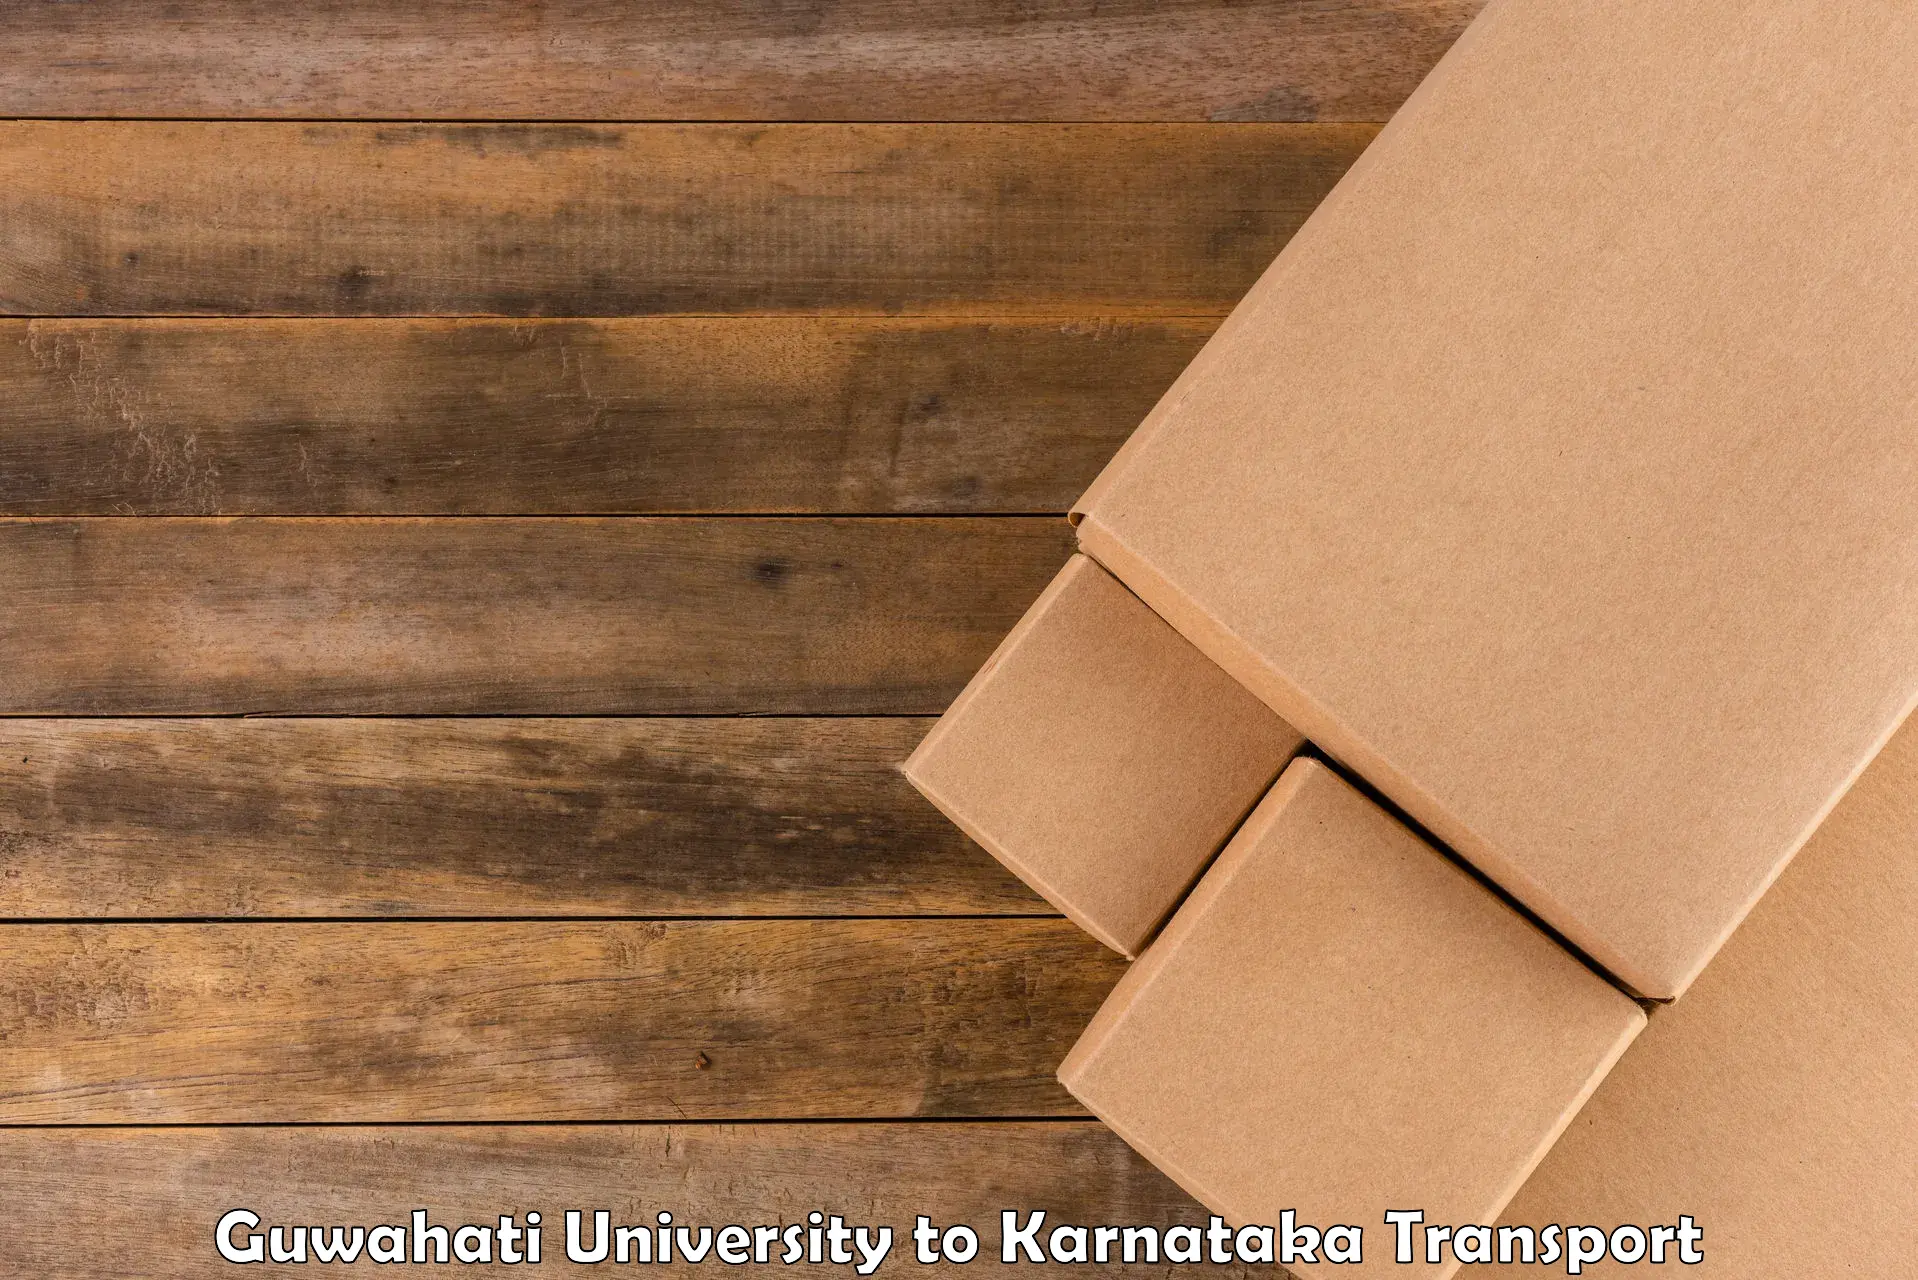 Package delivery services Guwahati University to Srinivaspur